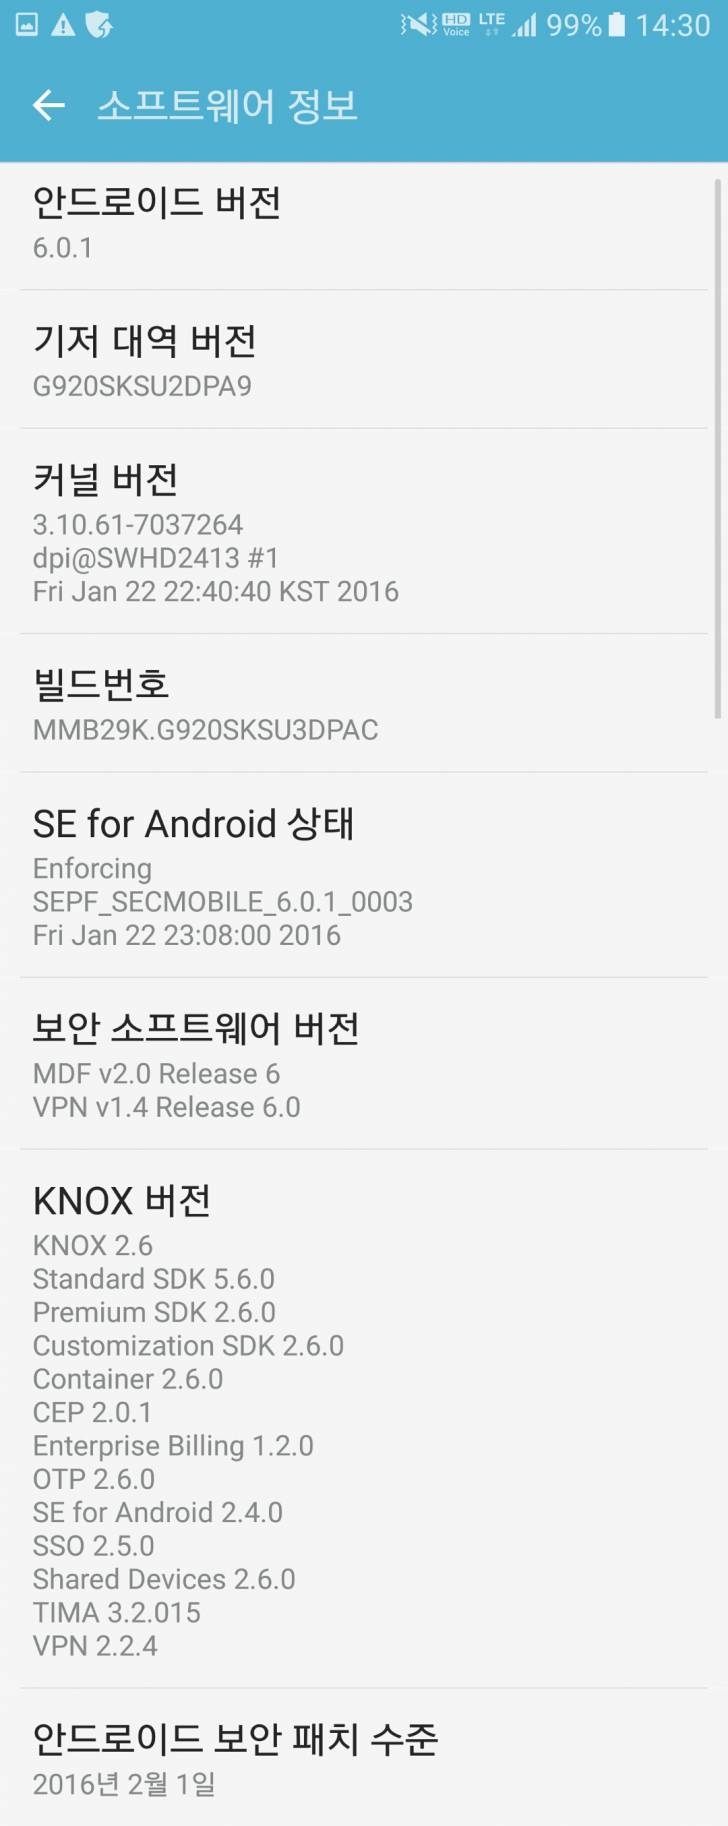 Samsung Galaxy S6 Android 6.0.1 Marshmallow update